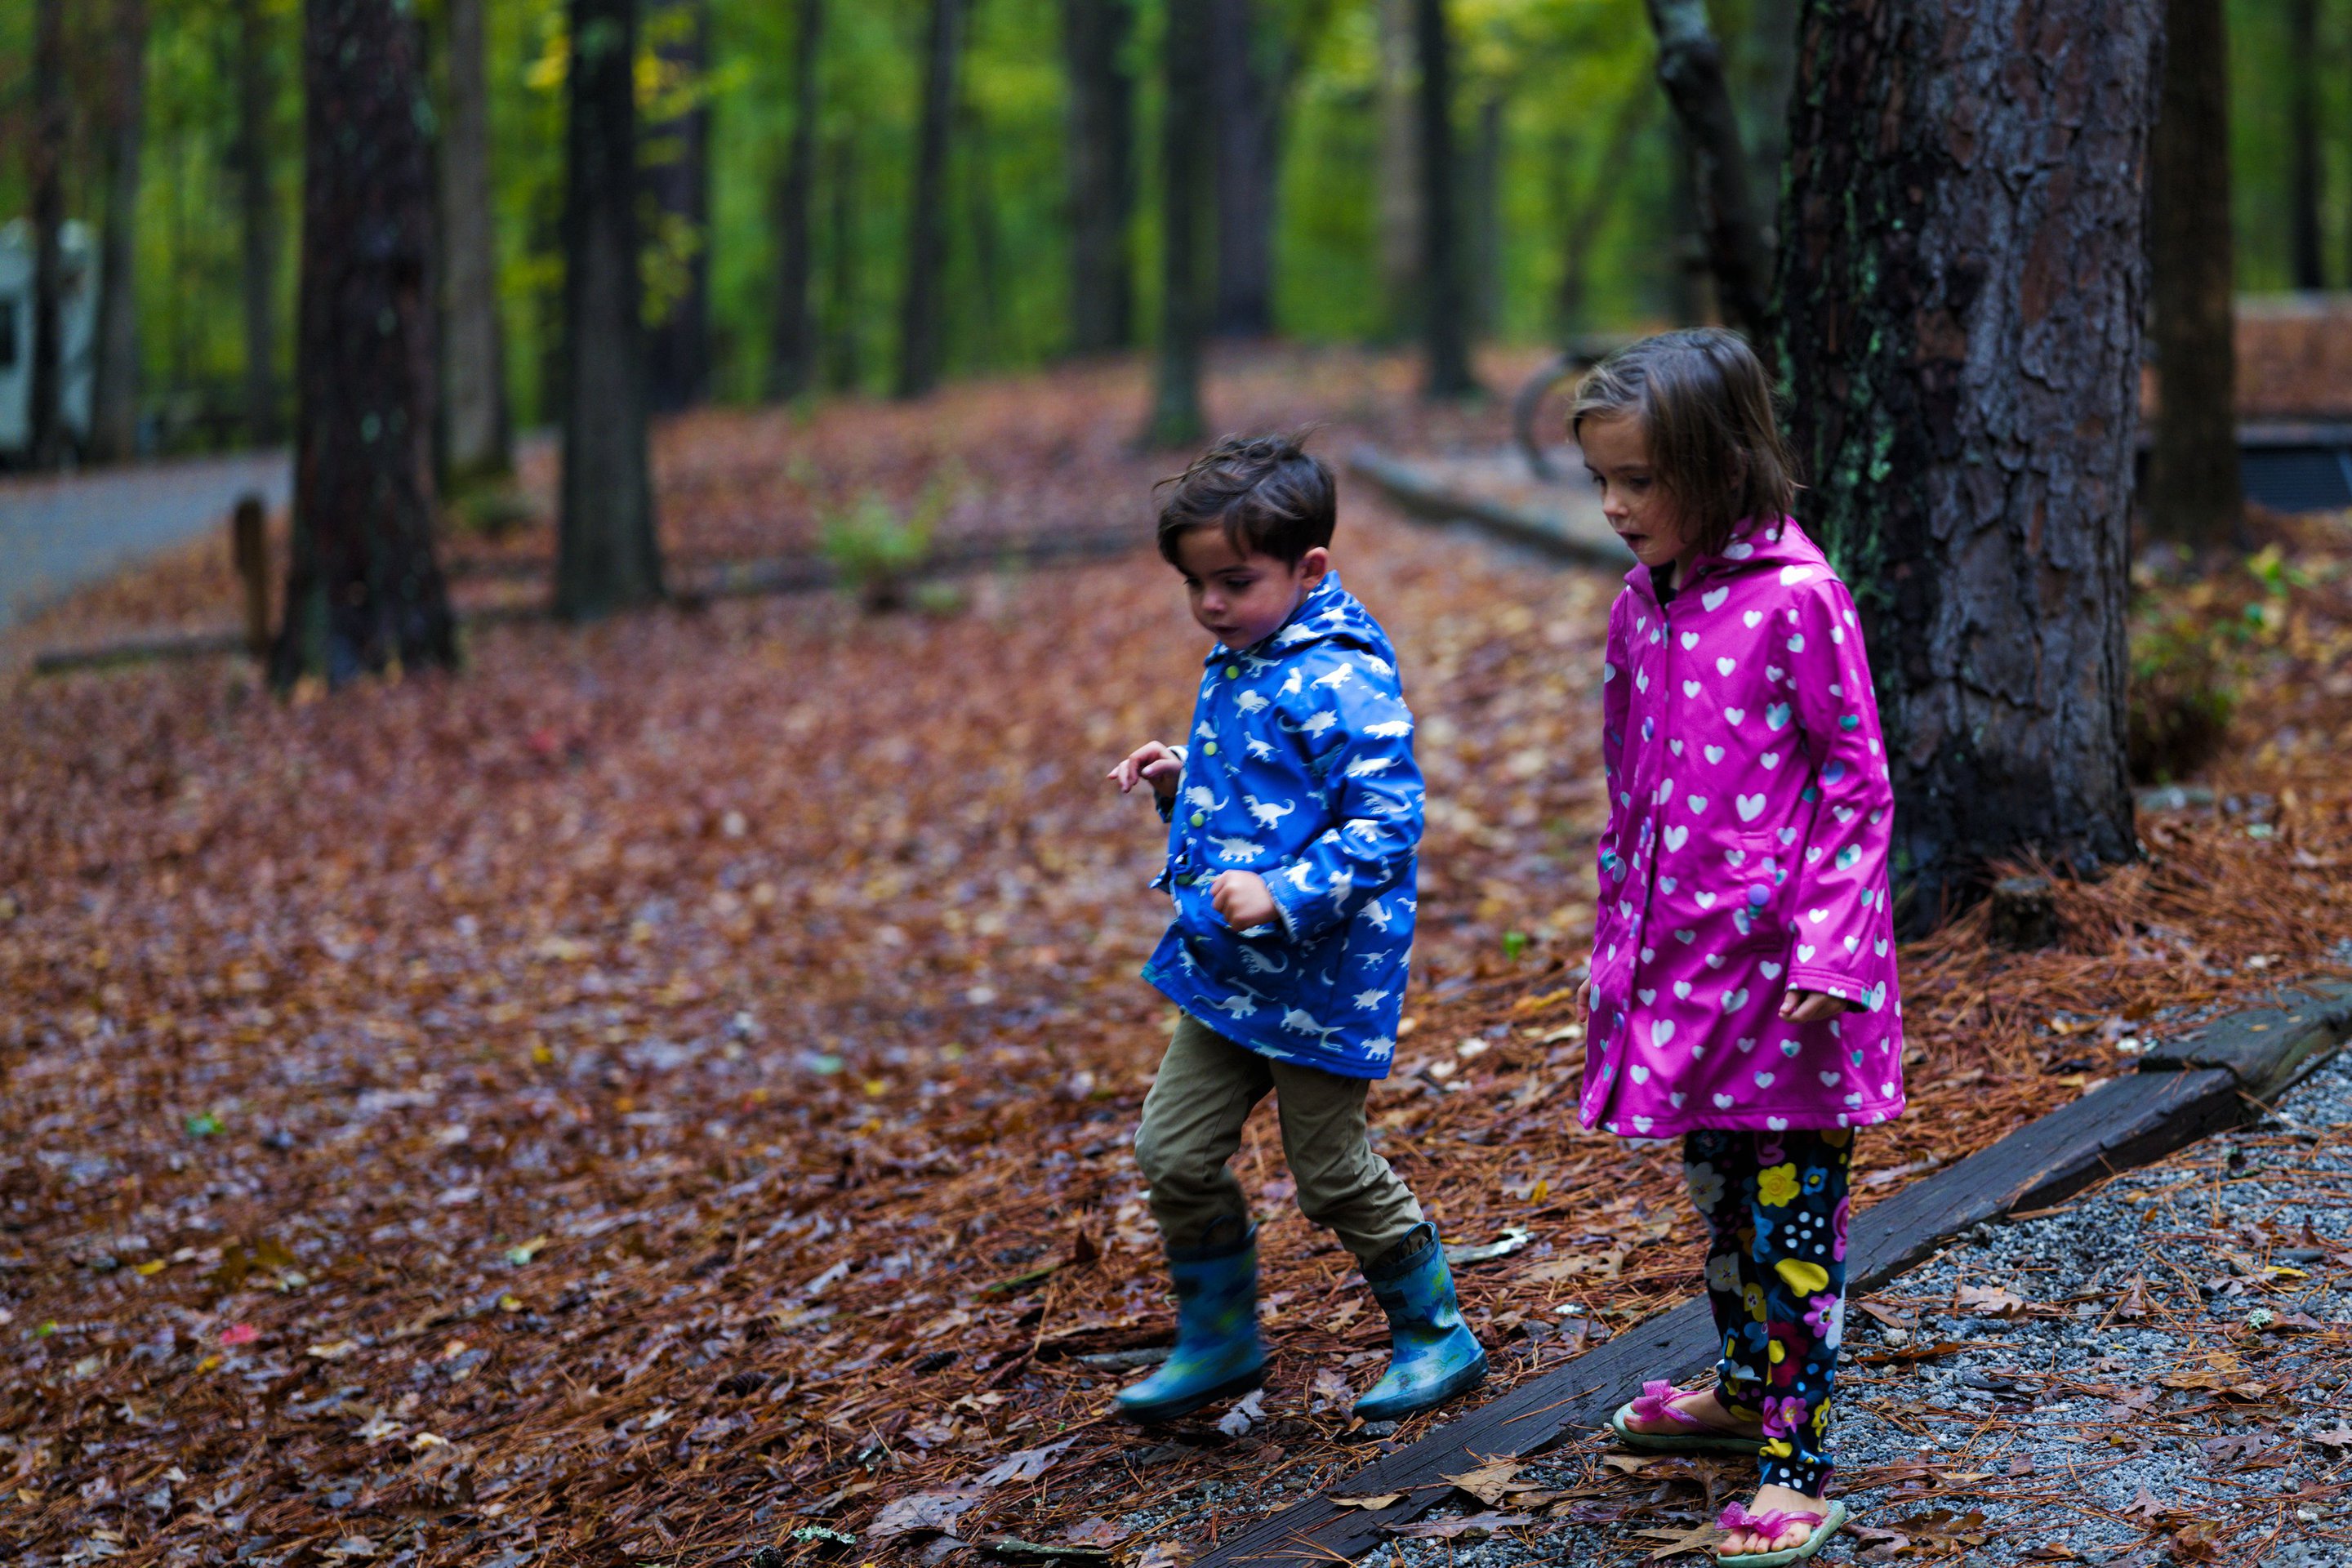 hiking in the rain, watson mill state park photographed by luxagraf